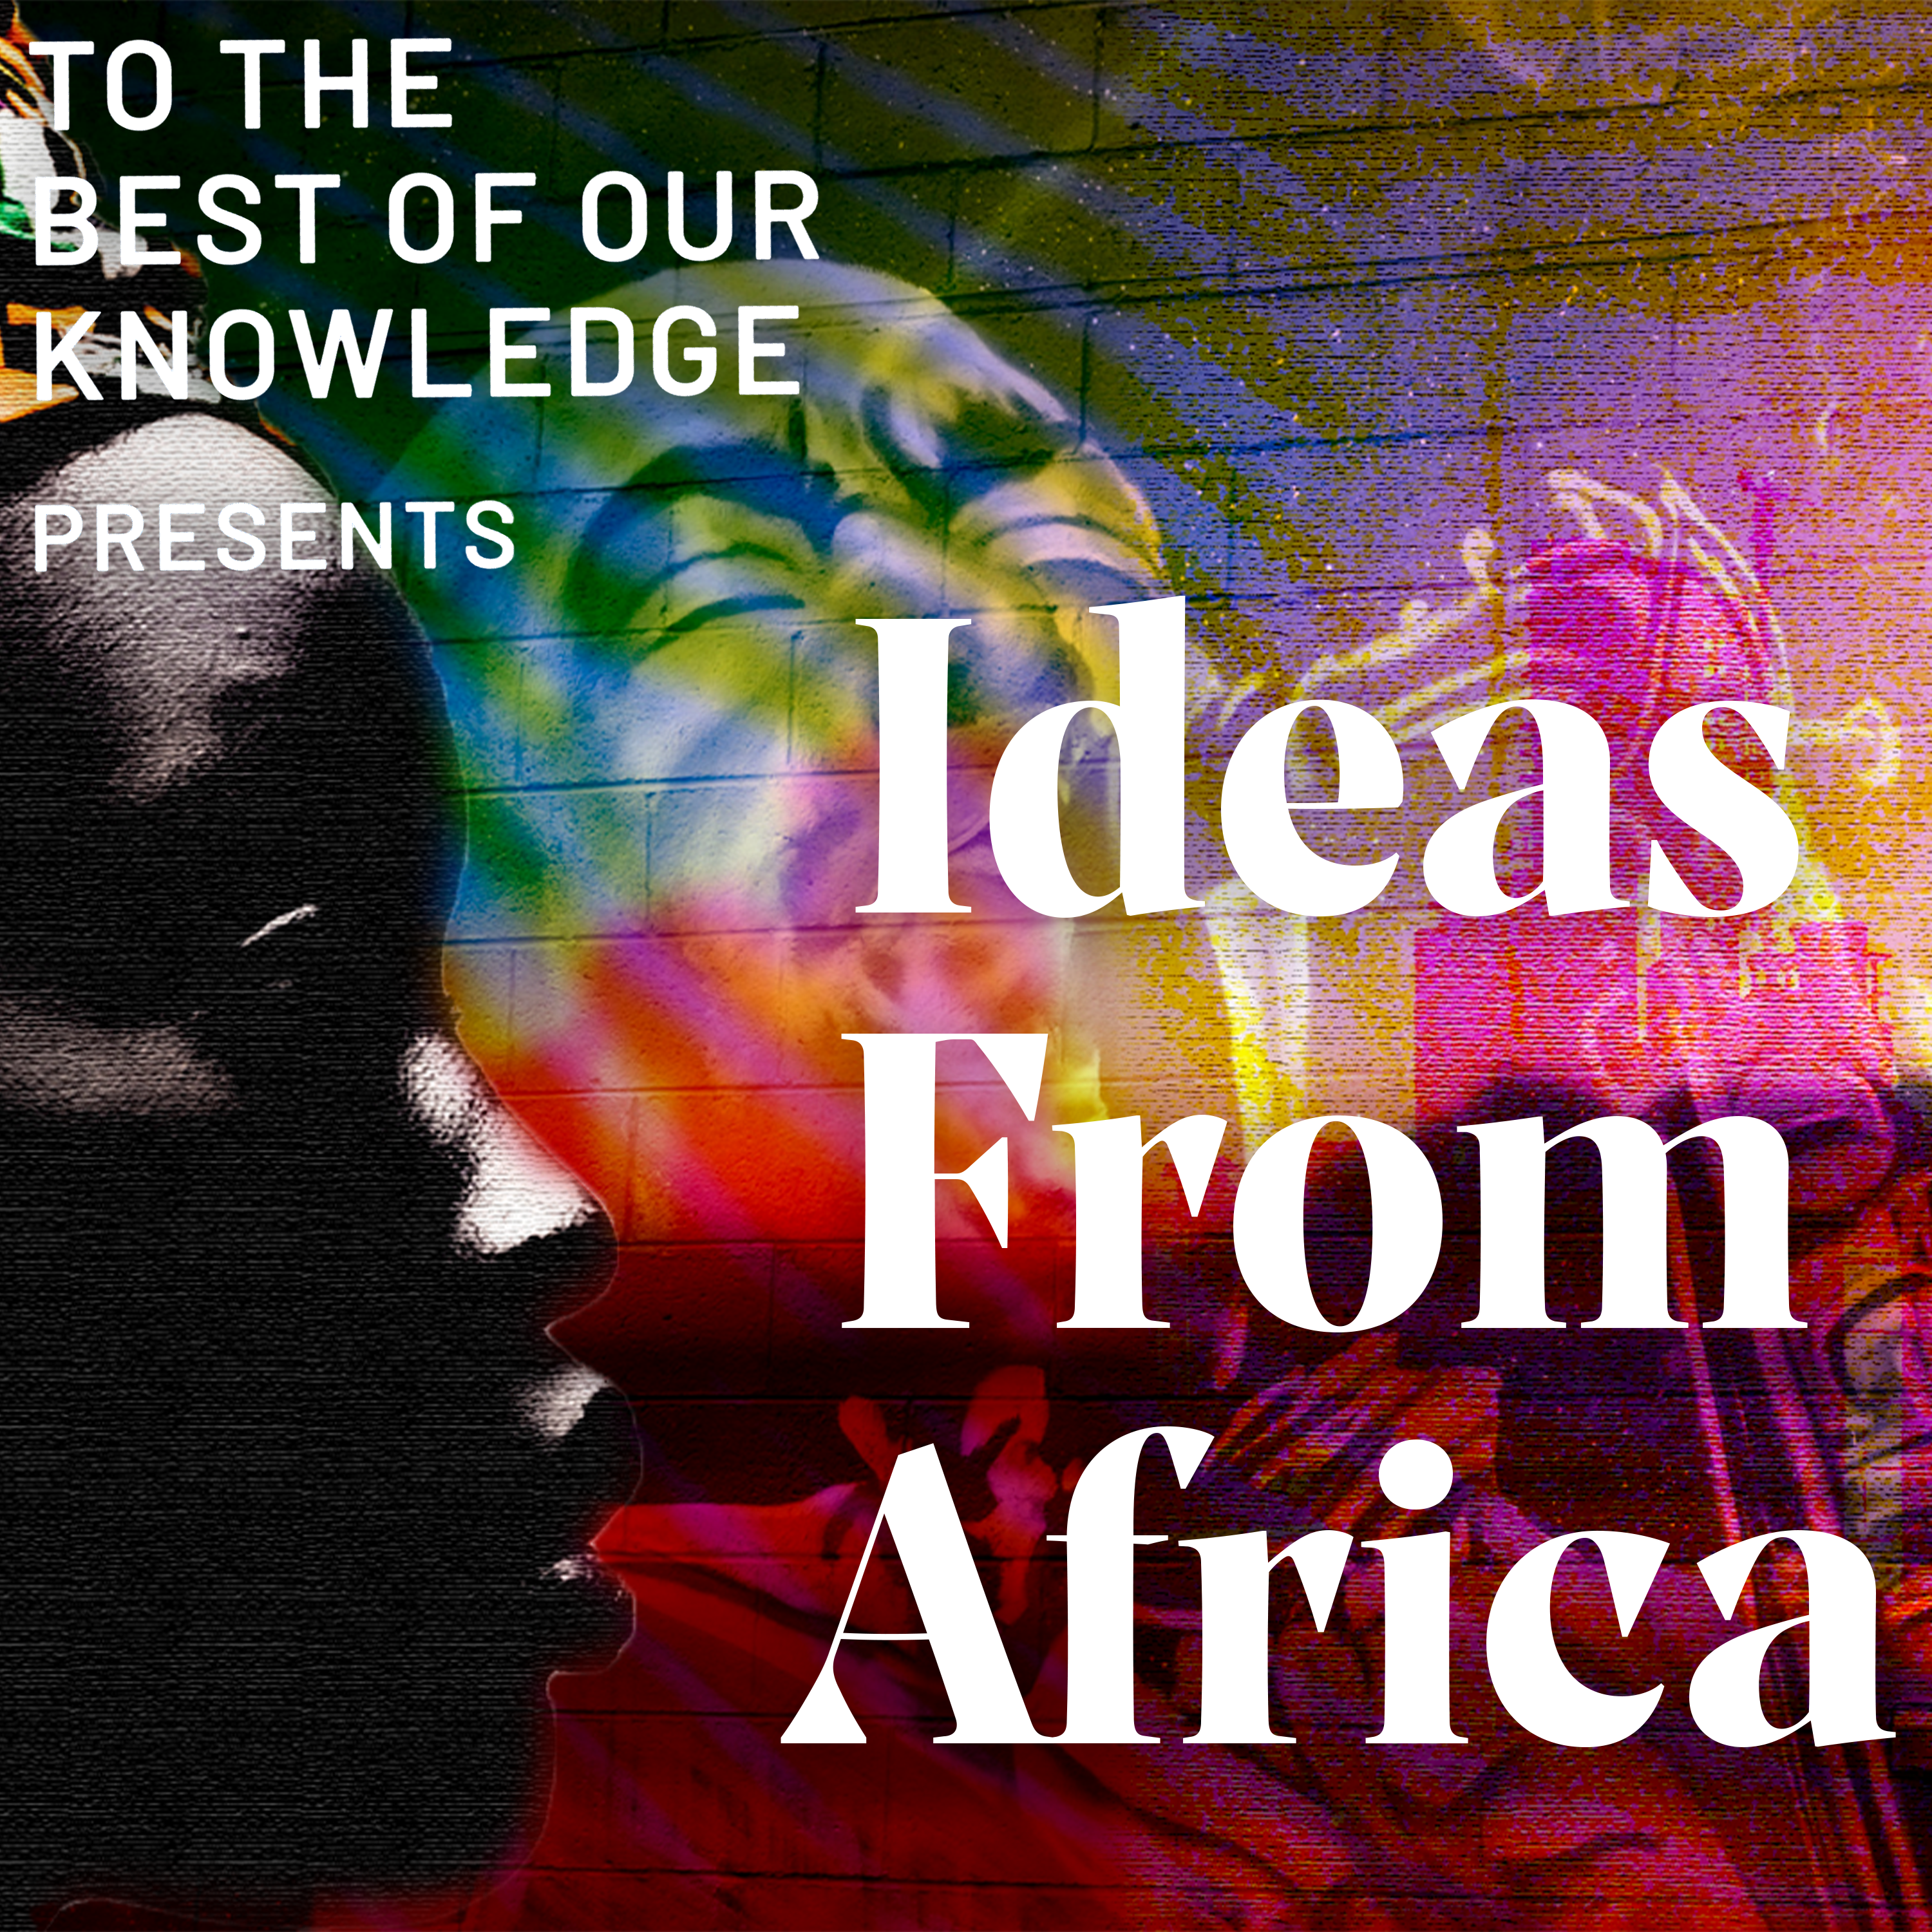 Ideas from Africa